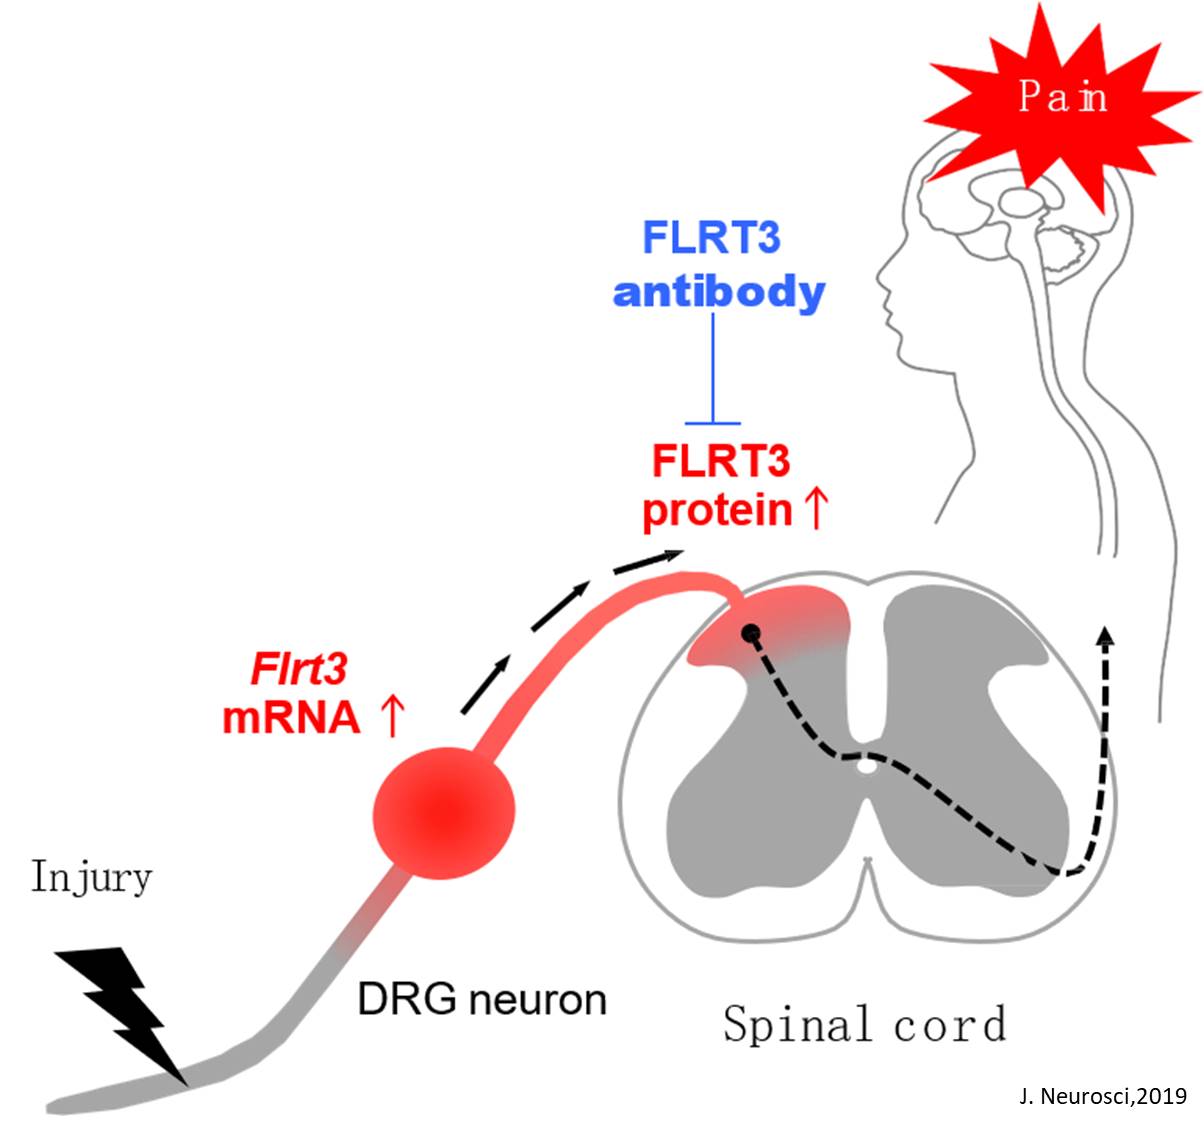 A new protein implicated in neuropathic pain 